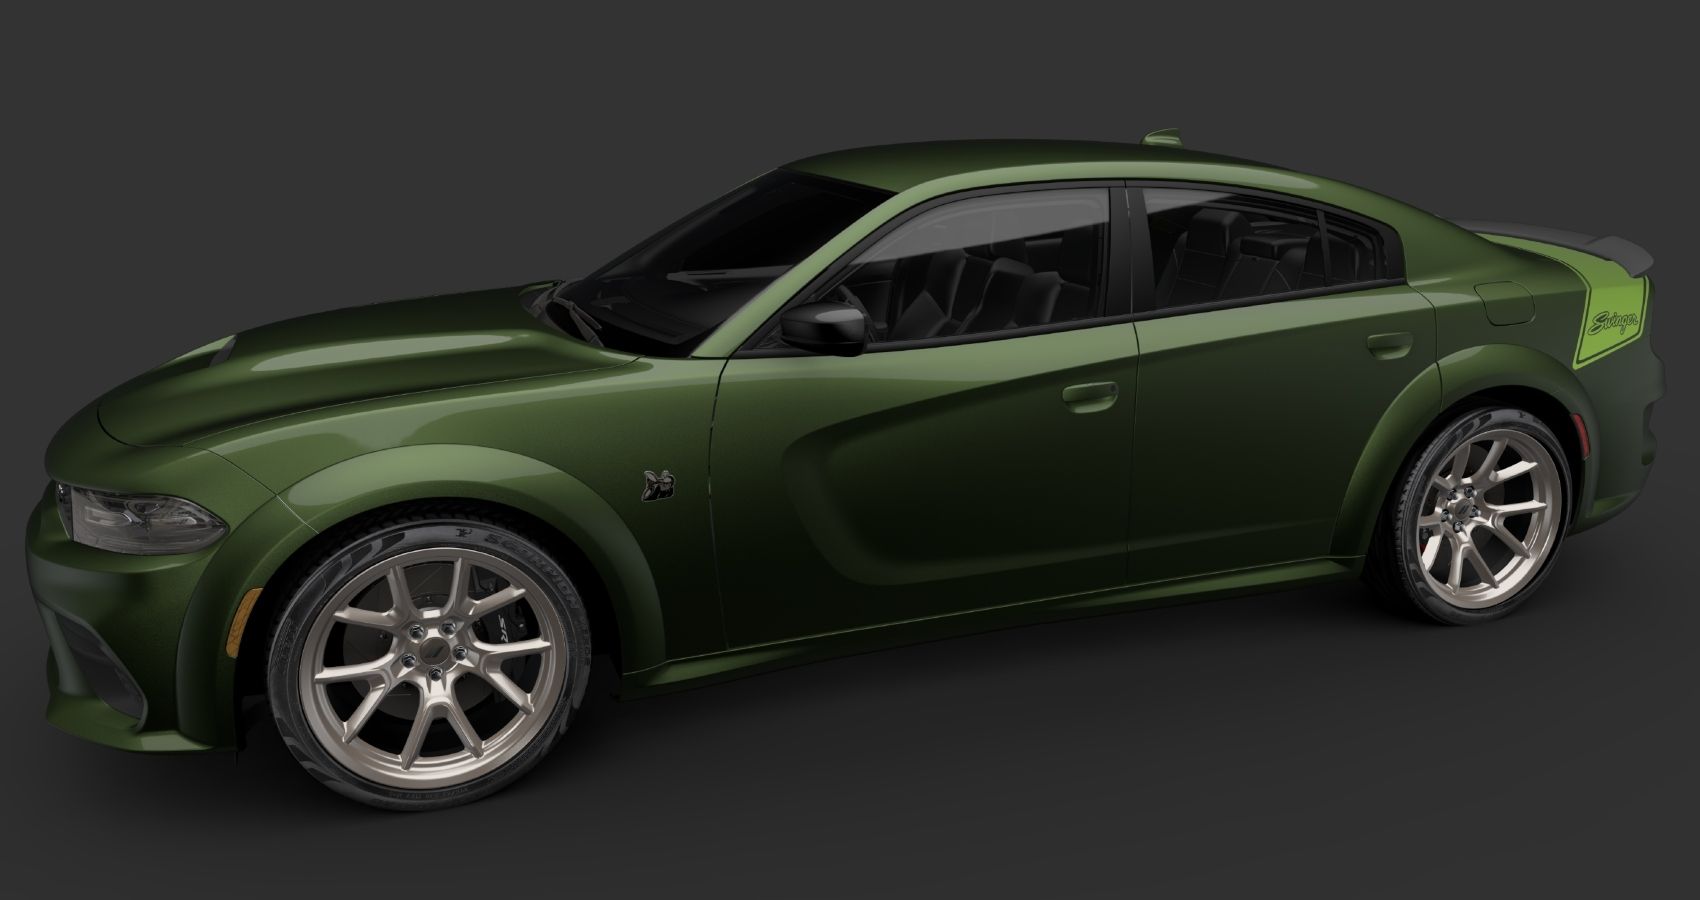 The 2023 Dodge Charger Scat Pack